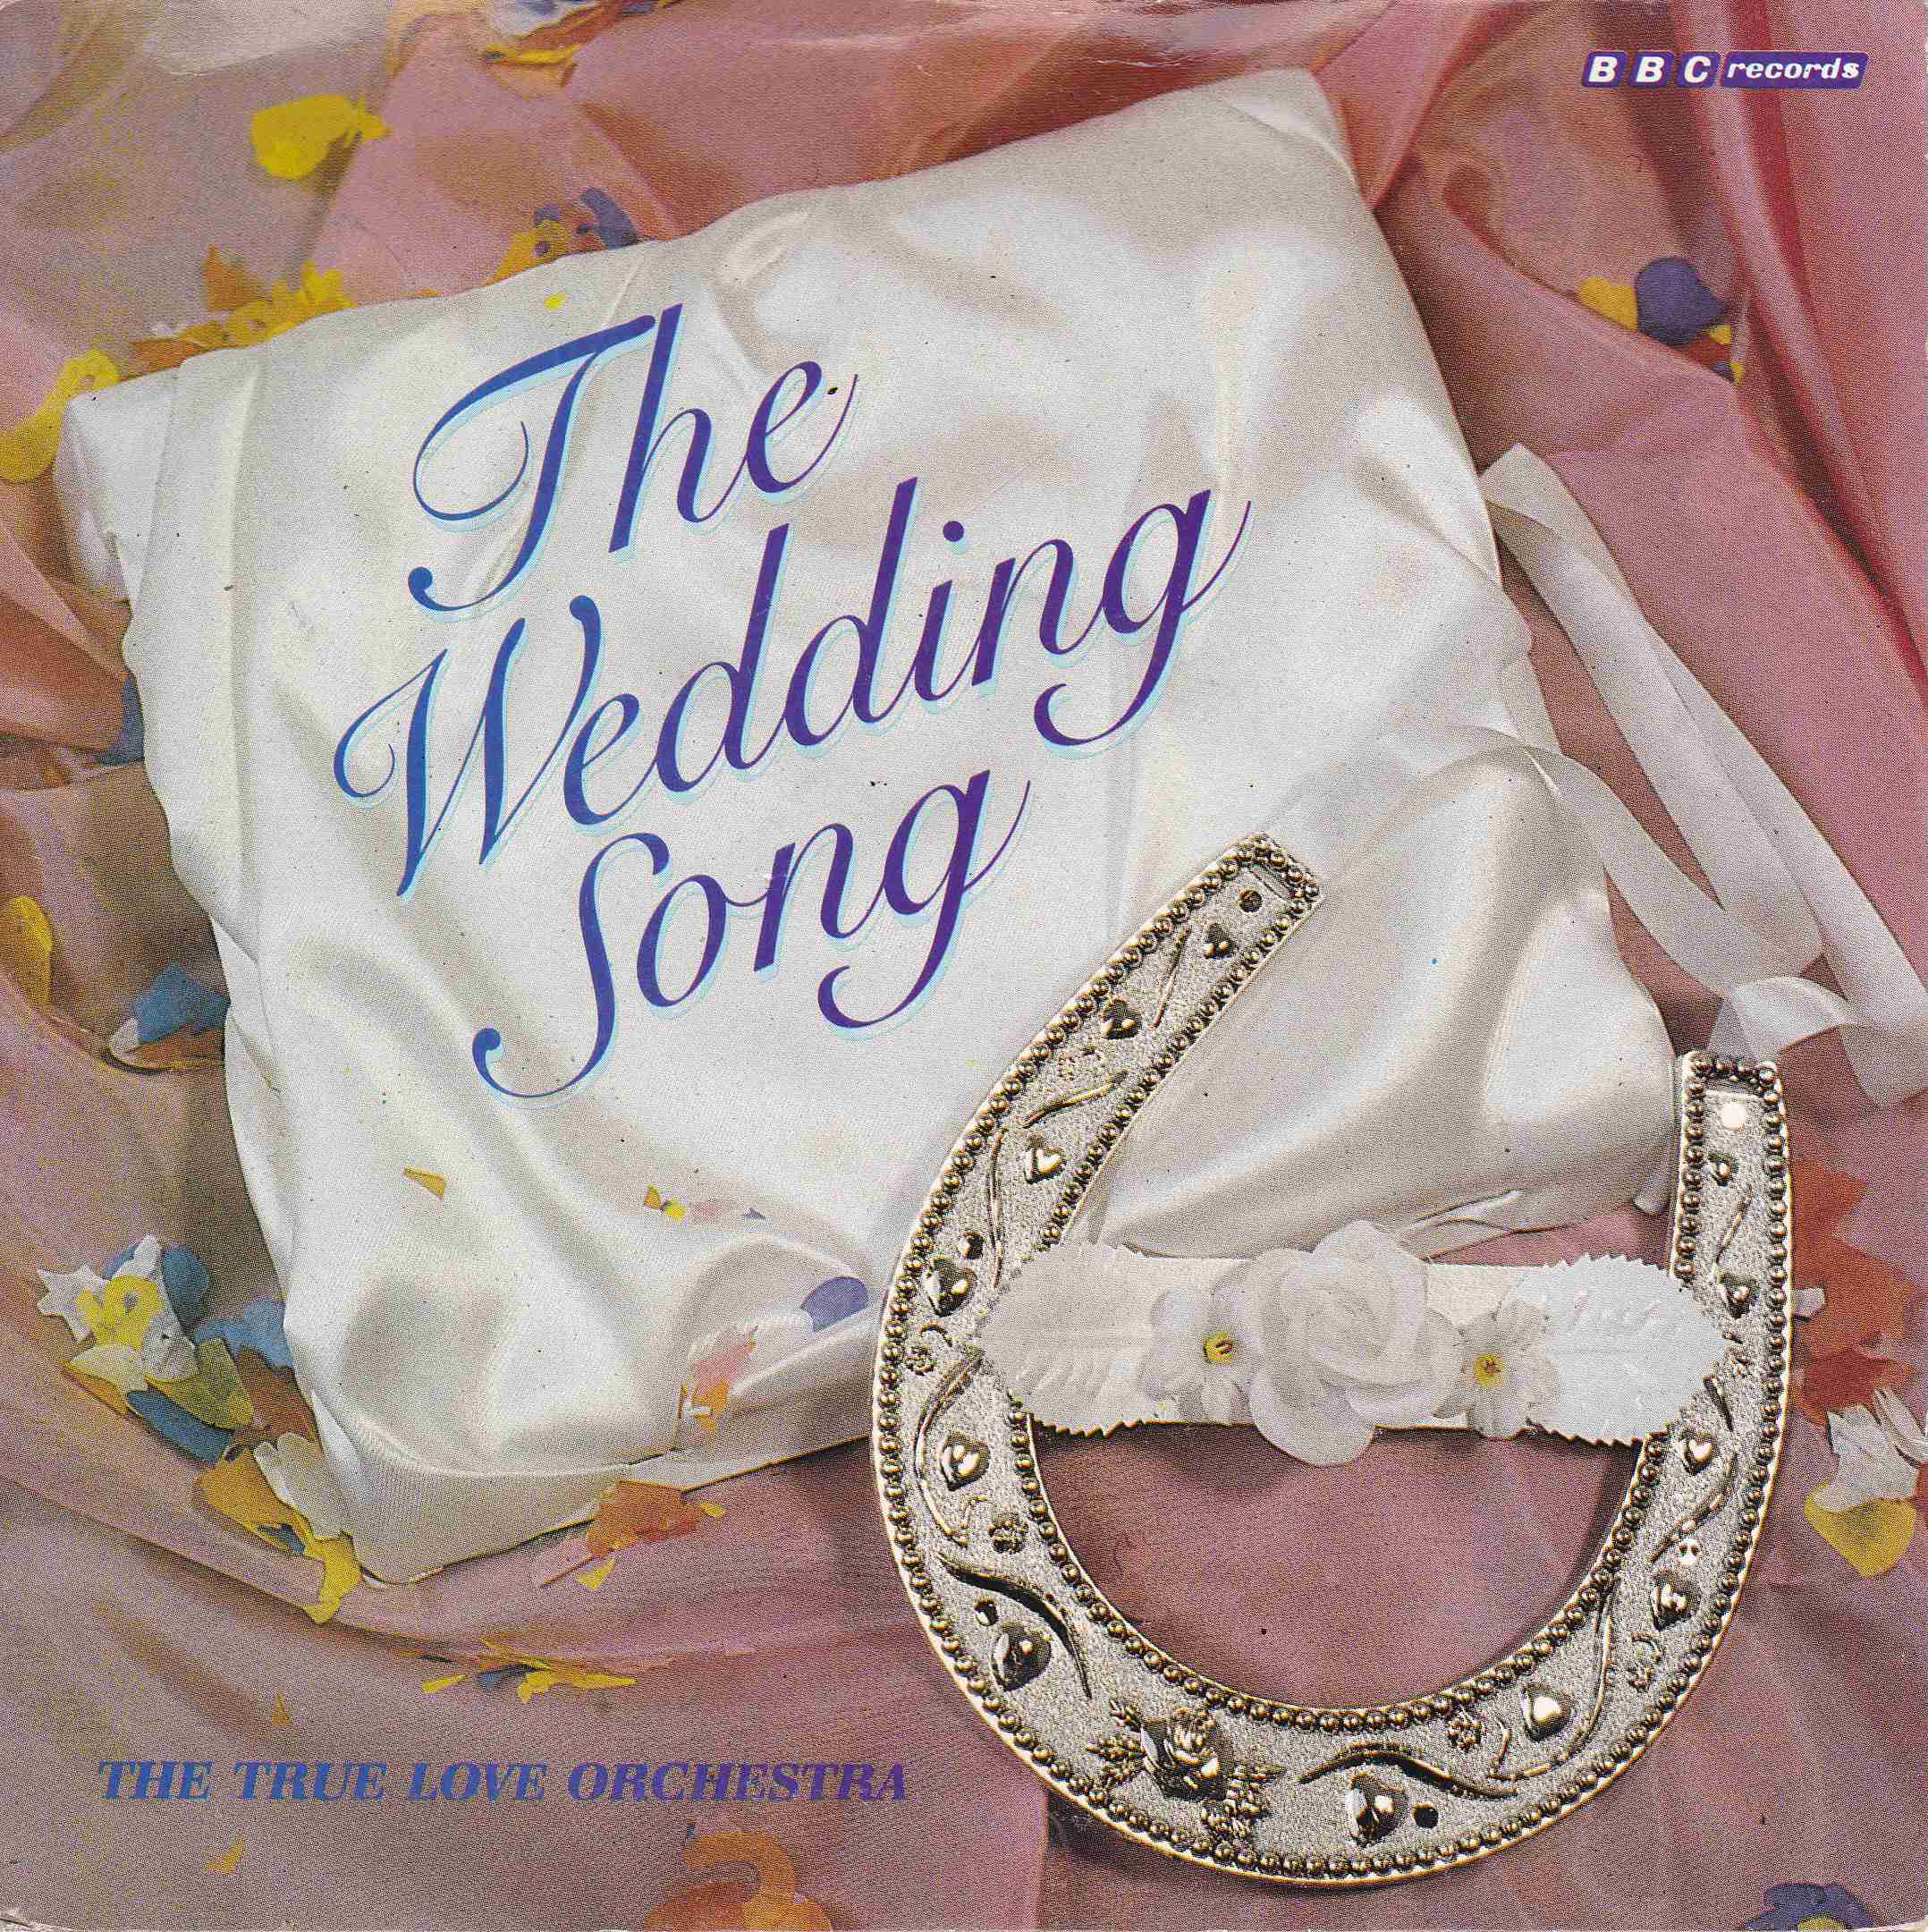 Picture of RESL 194 The wedding song by artist The True Love Orchestra from the BBC records and Tapes library